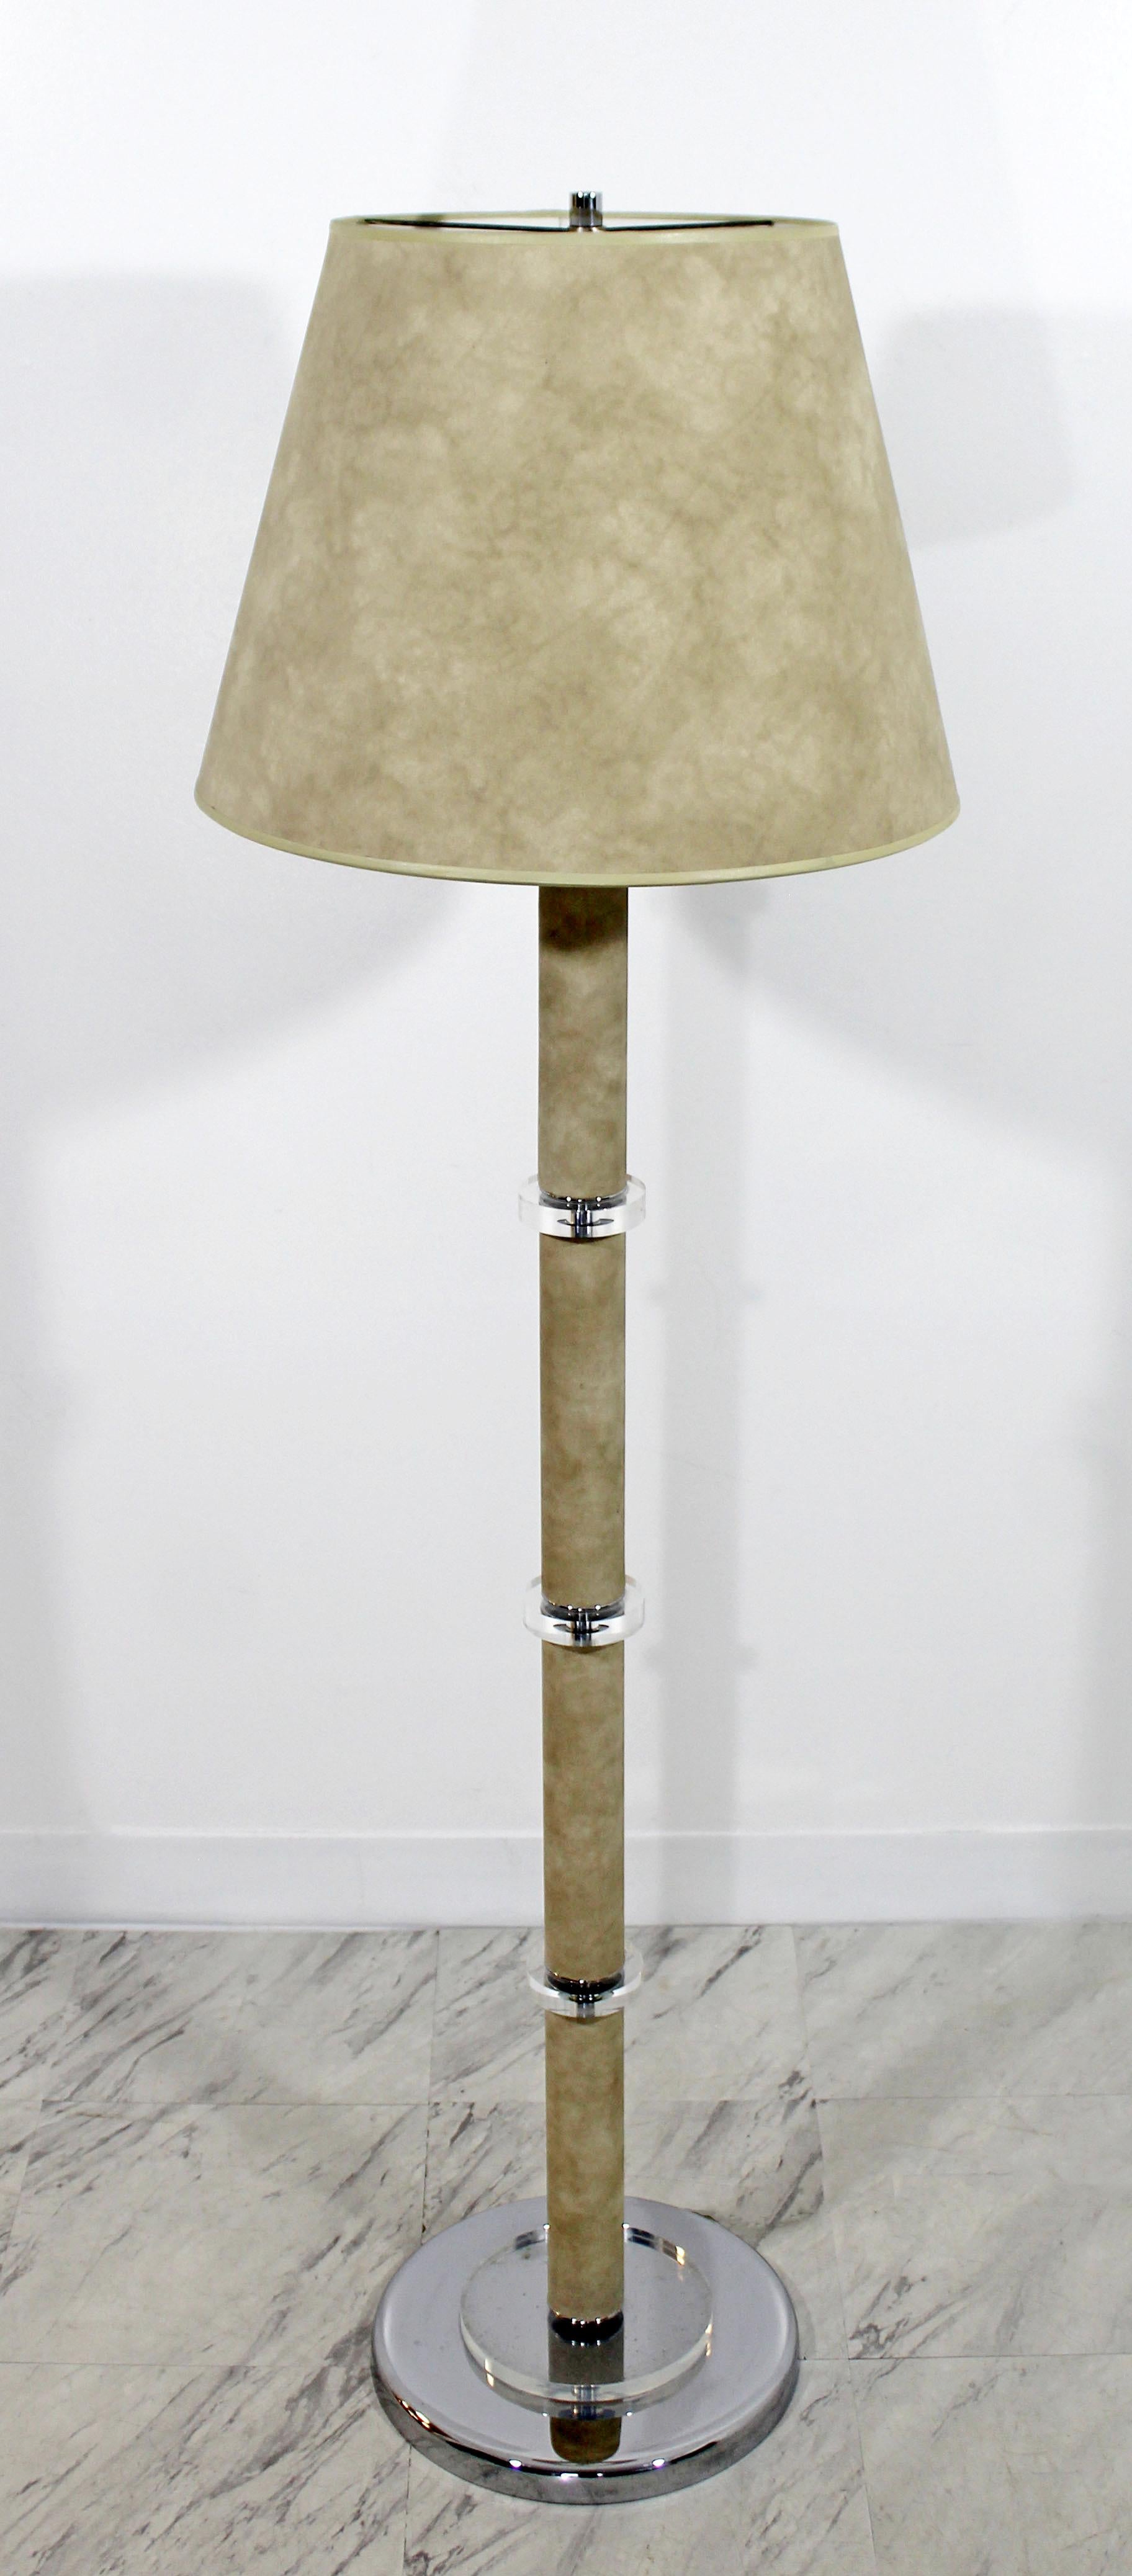 For your consideration is a magnificent floor lamp, with a chrome base, Lucite accents and wrapped in tan suede, in the style of Karl Springer, circa 1970s. In excellent condition, despite some dirt caught between the Lucite and chrome base. The